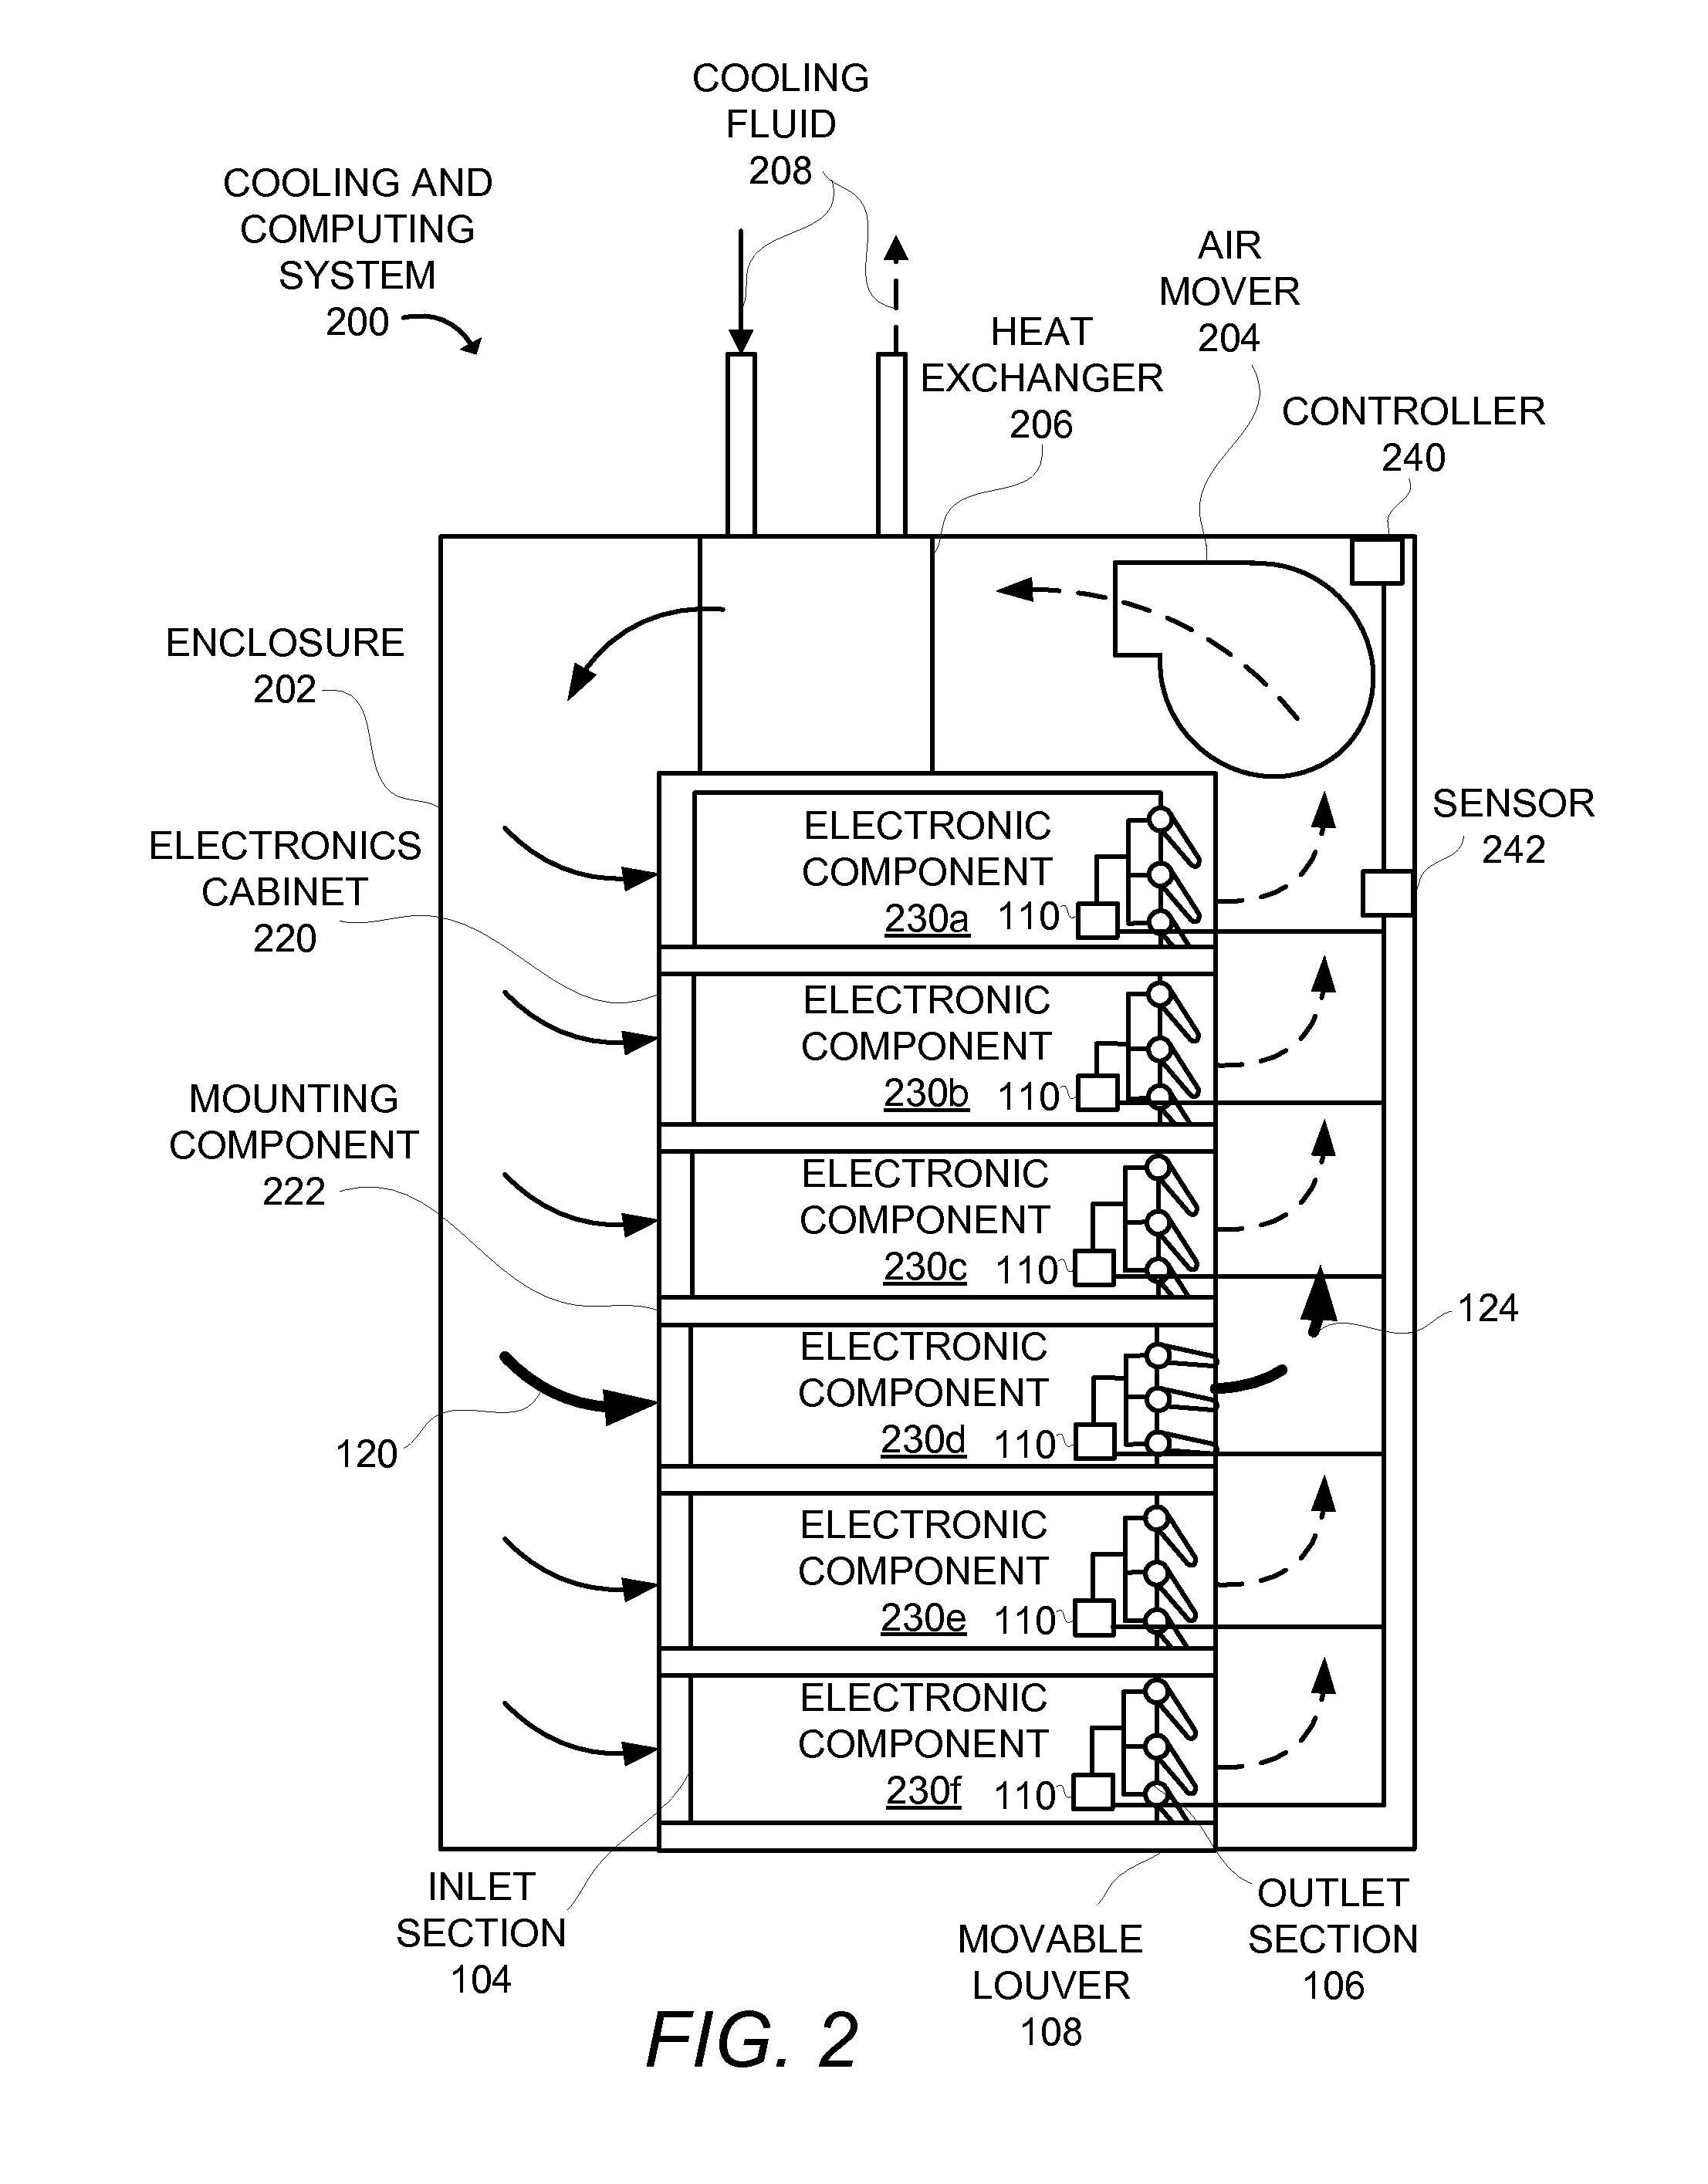 Electronic component having a movable louver